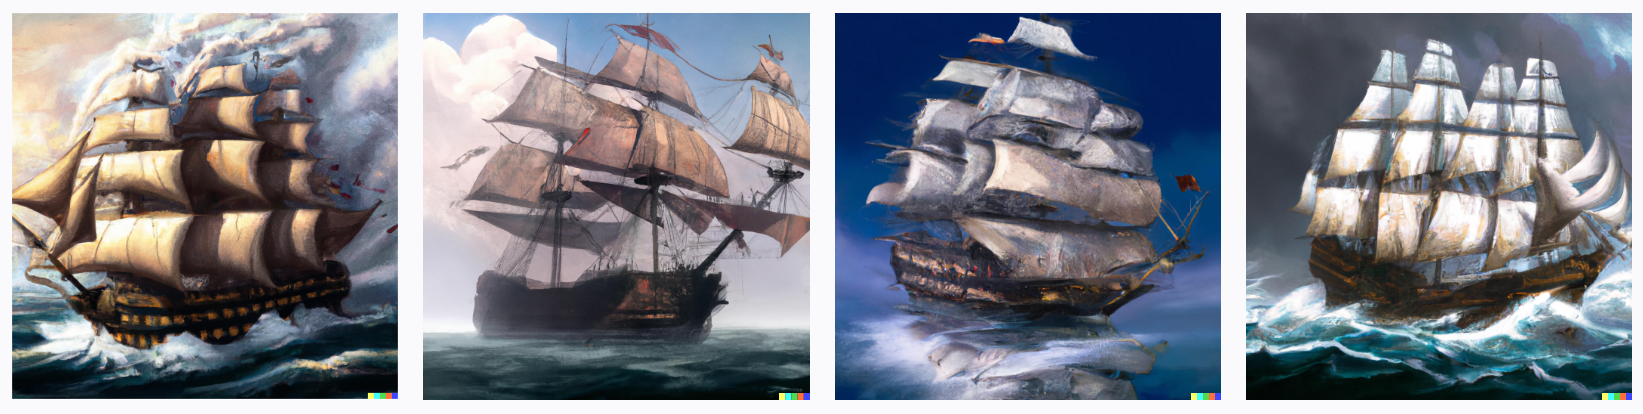 A sail 3 decks 50 cannons vessel with cannons on the ocean waves like Aivazovsky painting style, digital art